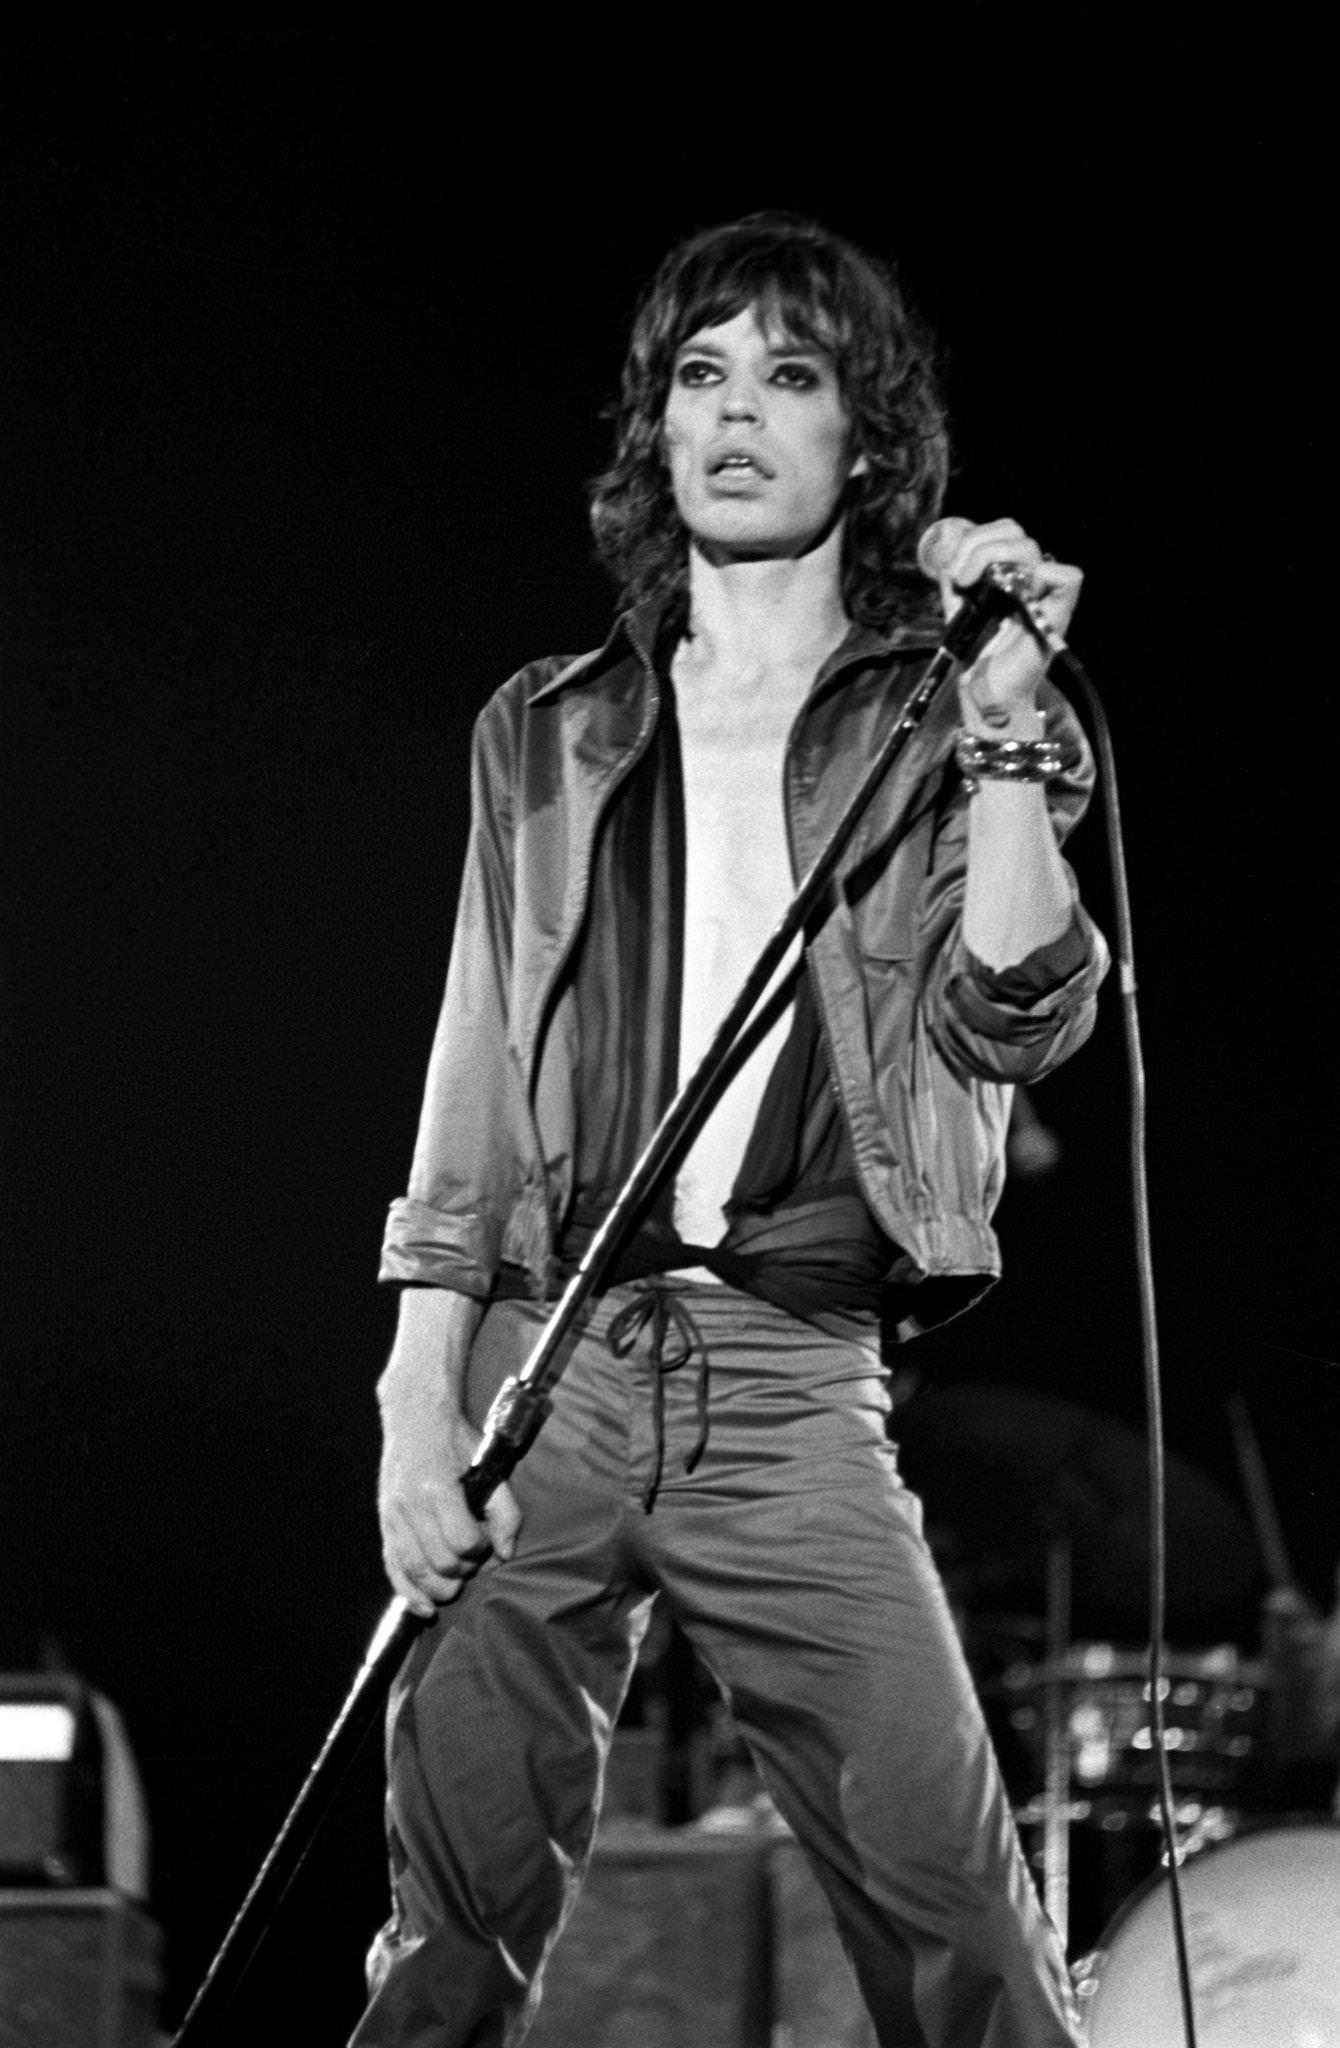 Mick Jagger performs on stage at Madison Square Garden during the band's "Tour of America '75" on July 23, 1975, in New York, New York.